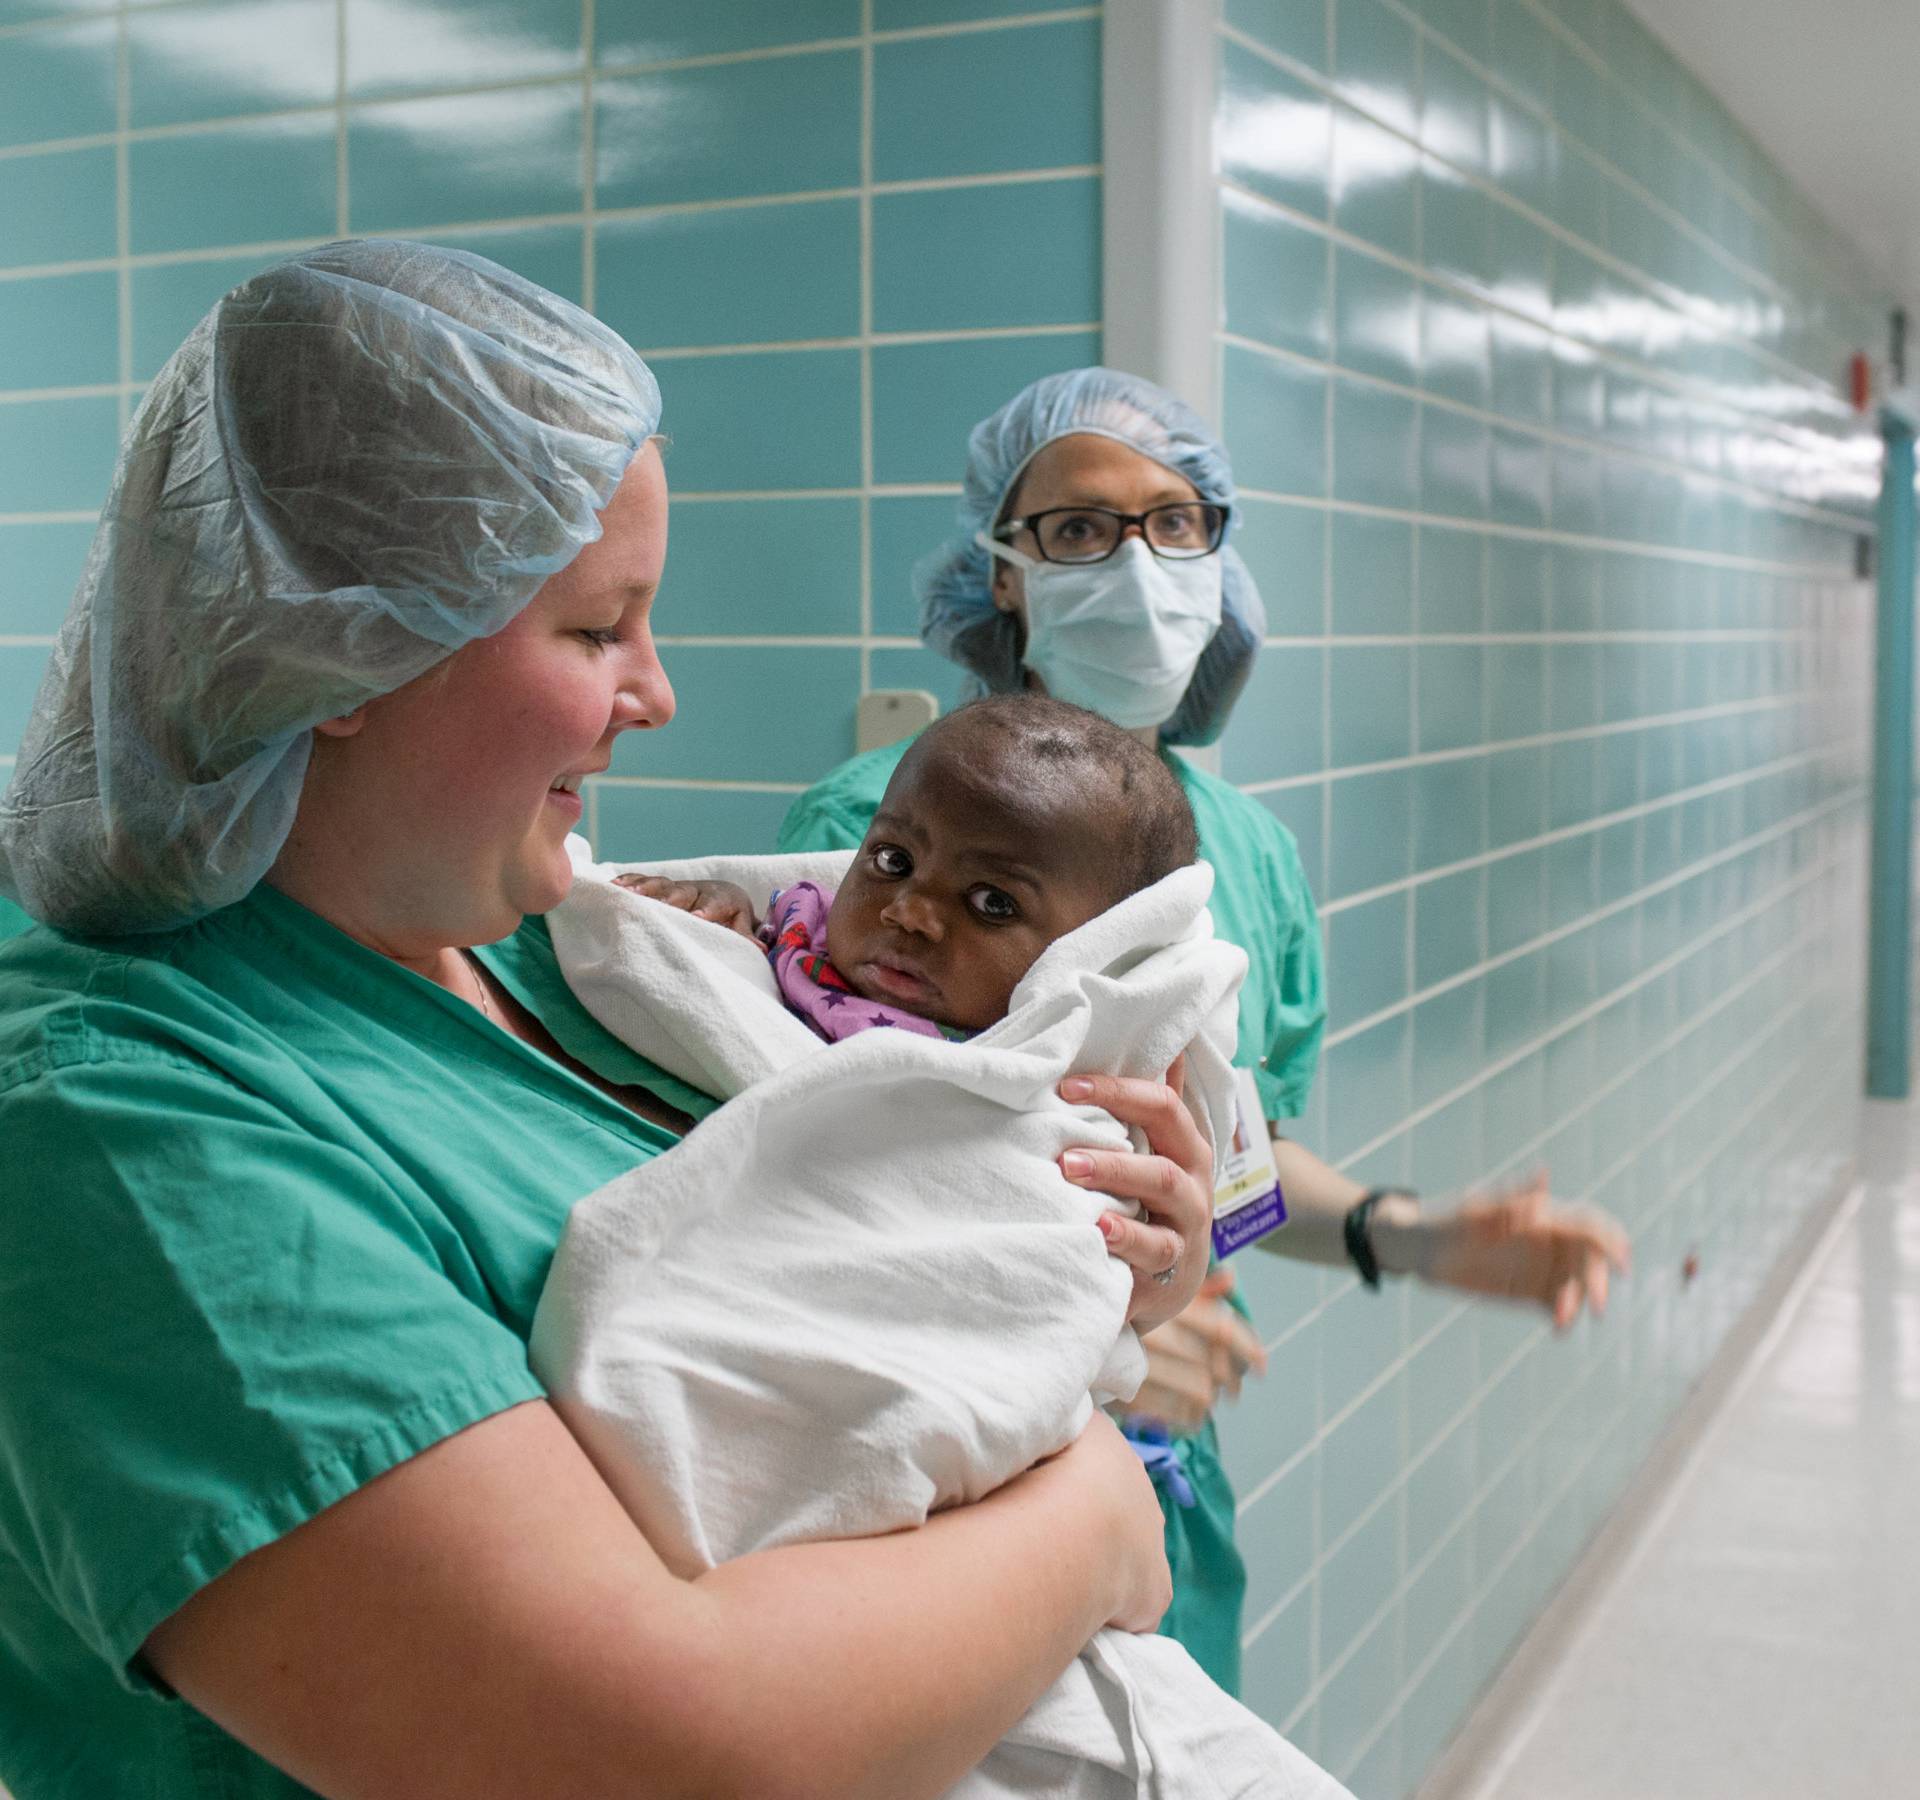 Hospital staff carry 10-month old "Baby Dominique" into surgery to treat the infant born with four legs and two spines at Advocate Children's Hospital in Park Ridge, Illinois